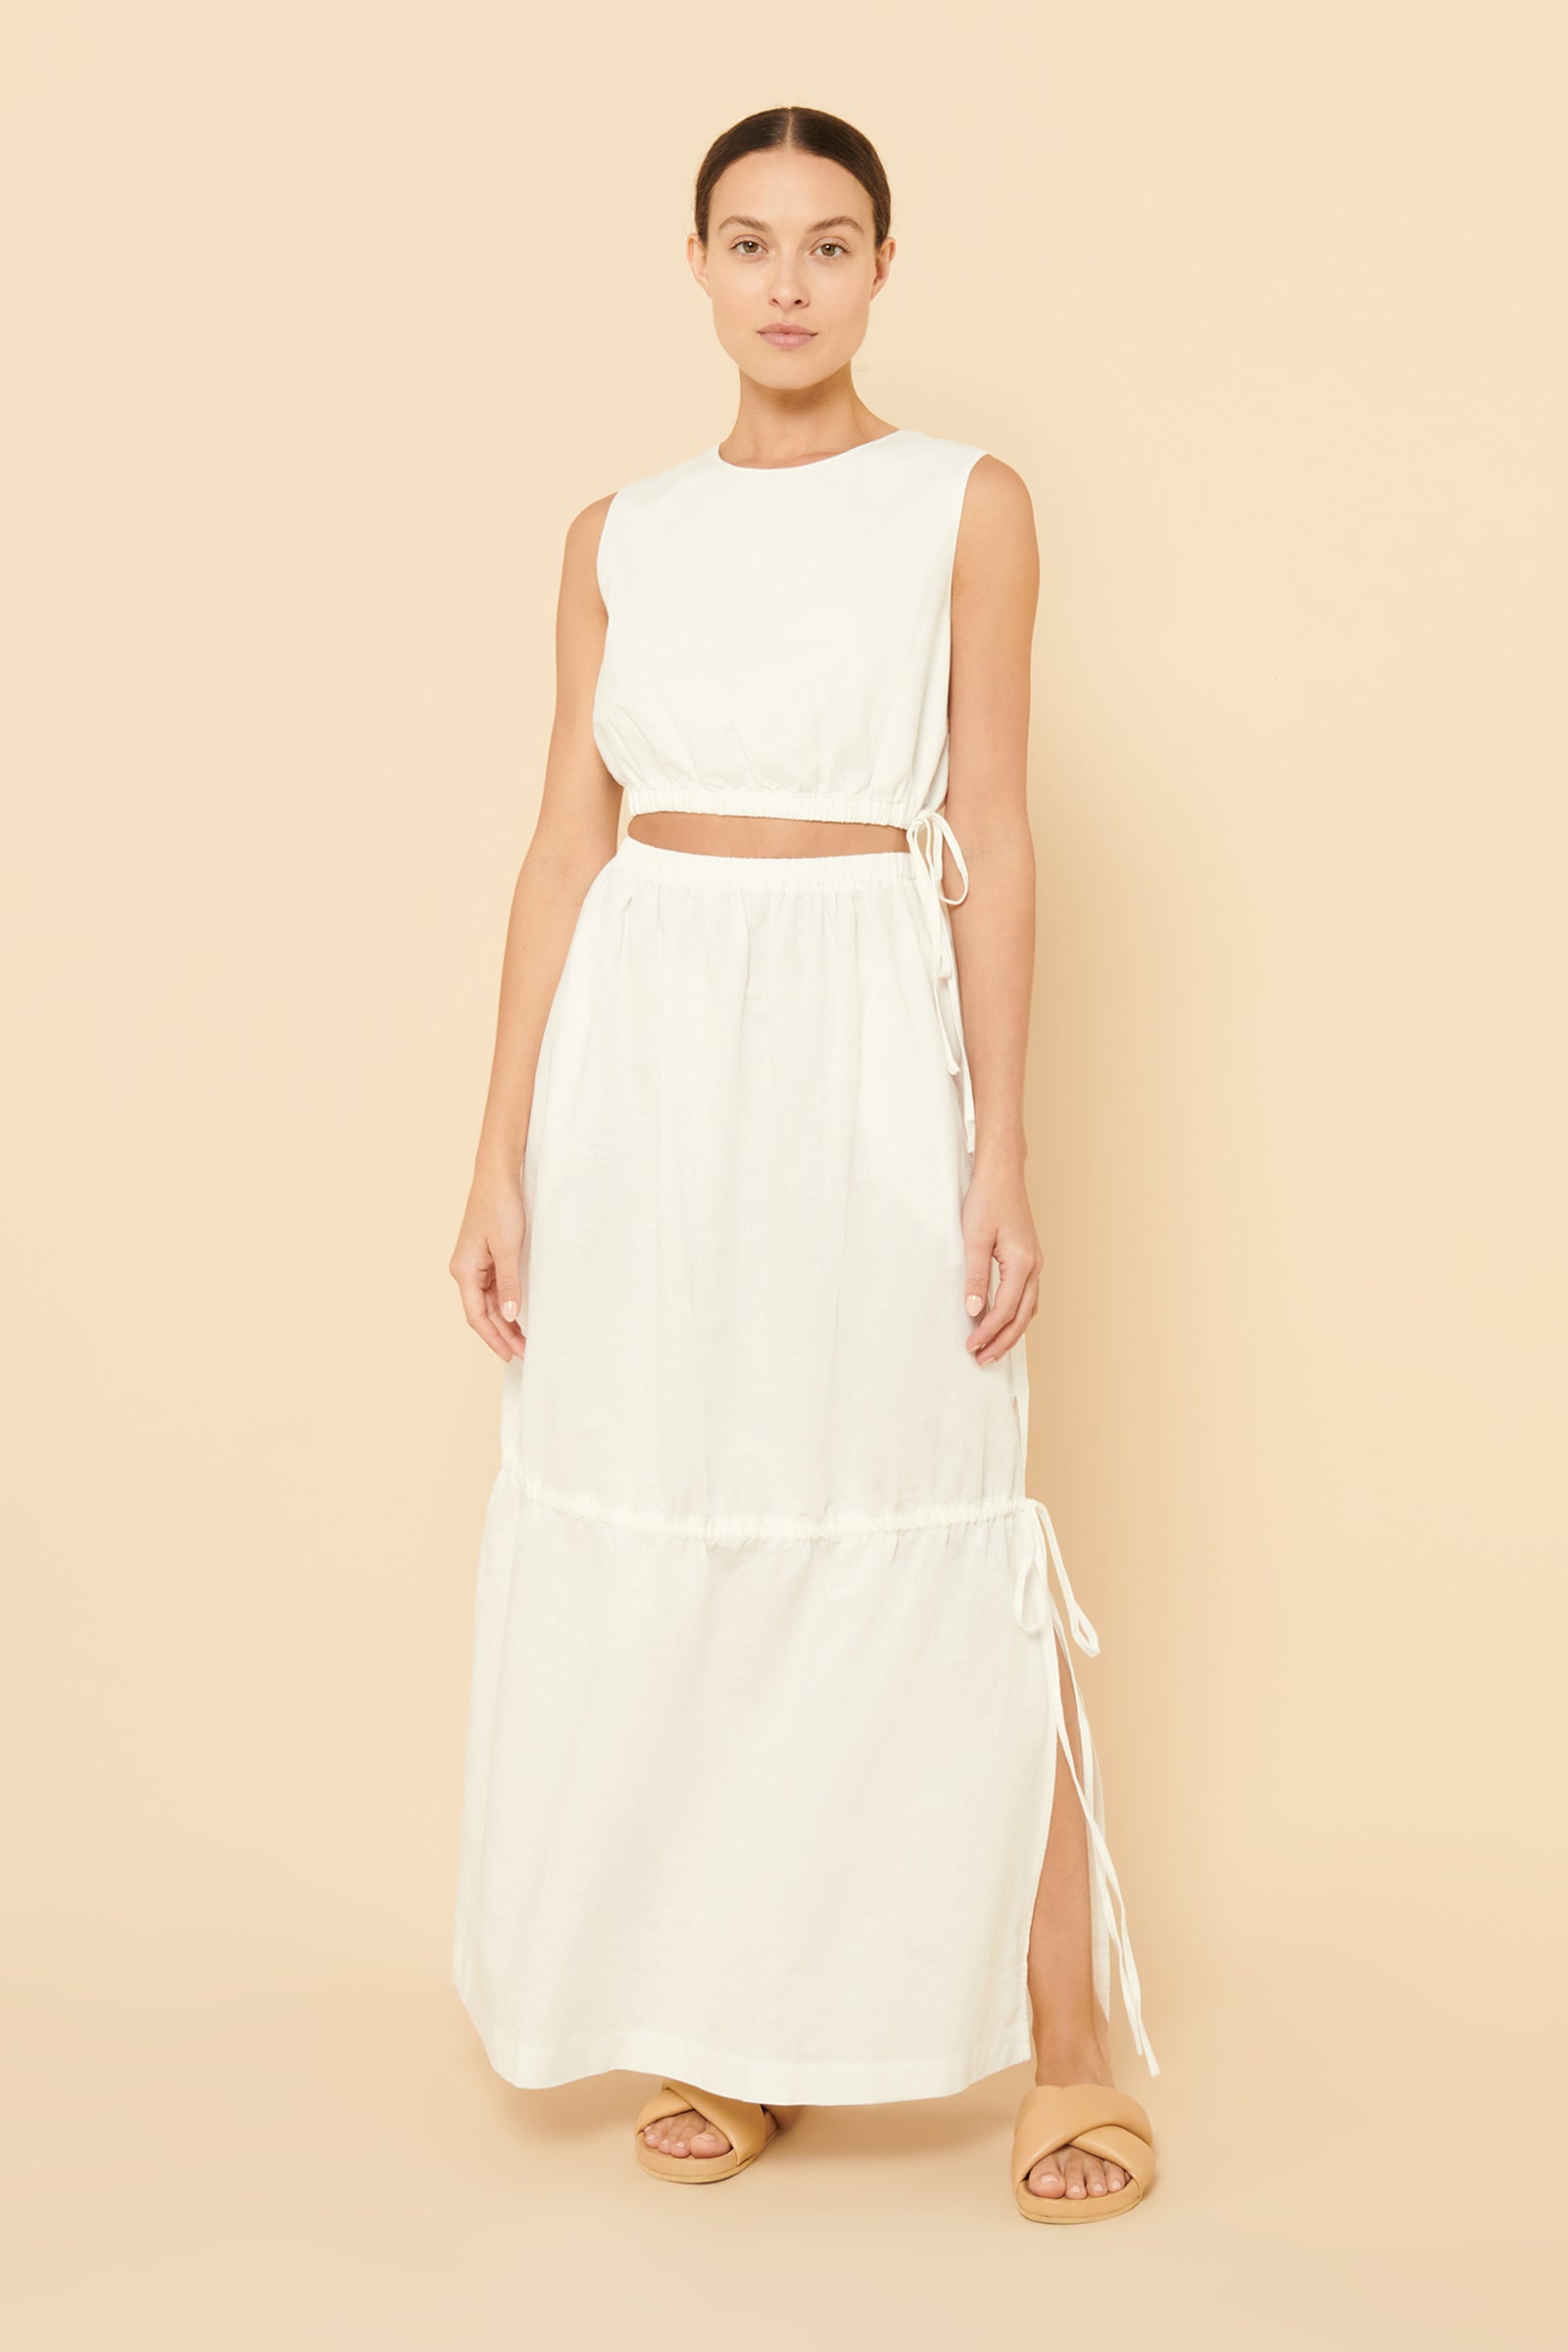 Nude Lucy Brea Linen Maxi Skirt in White